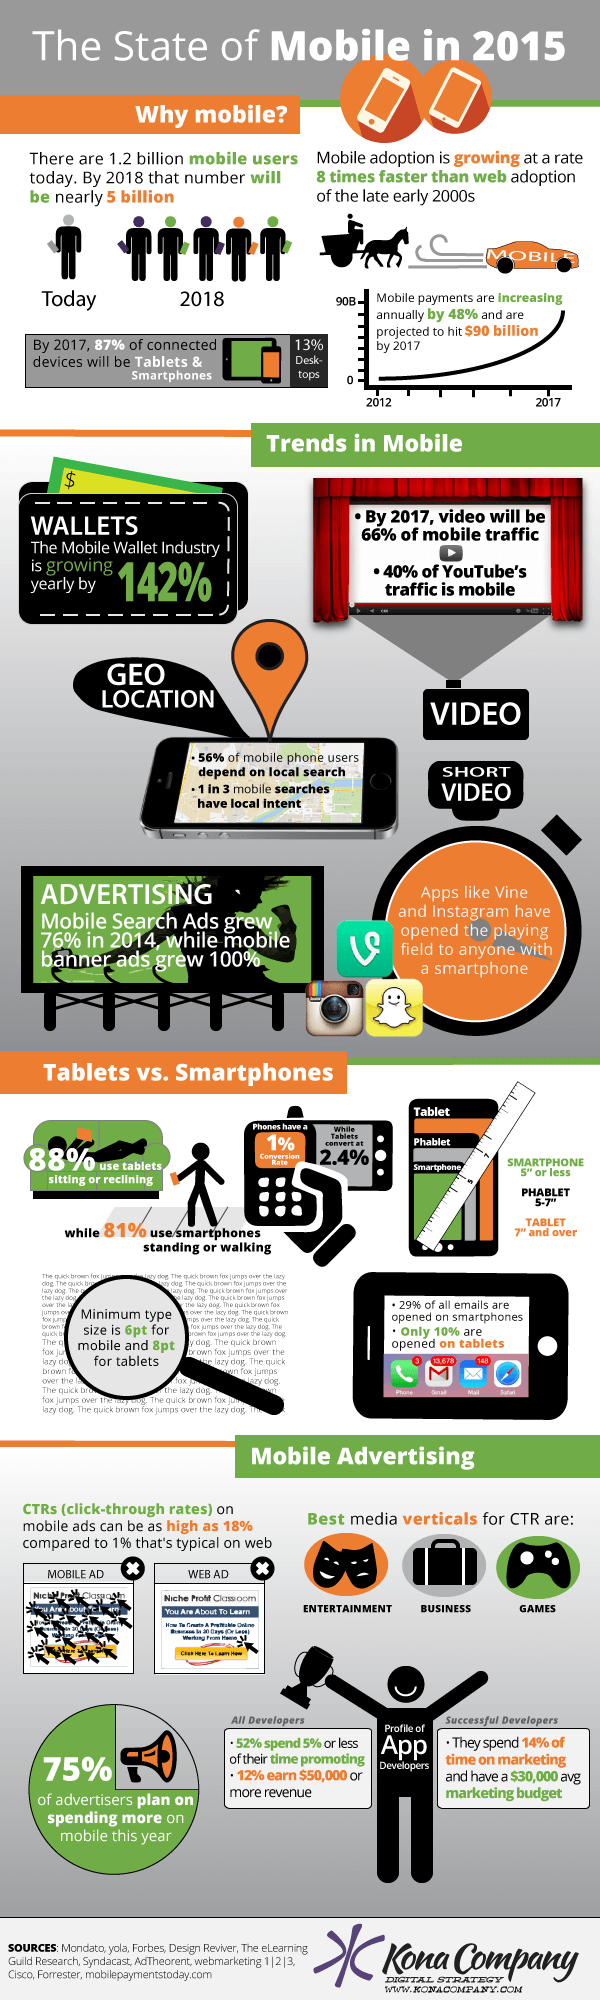 The State of Mobile in 2015